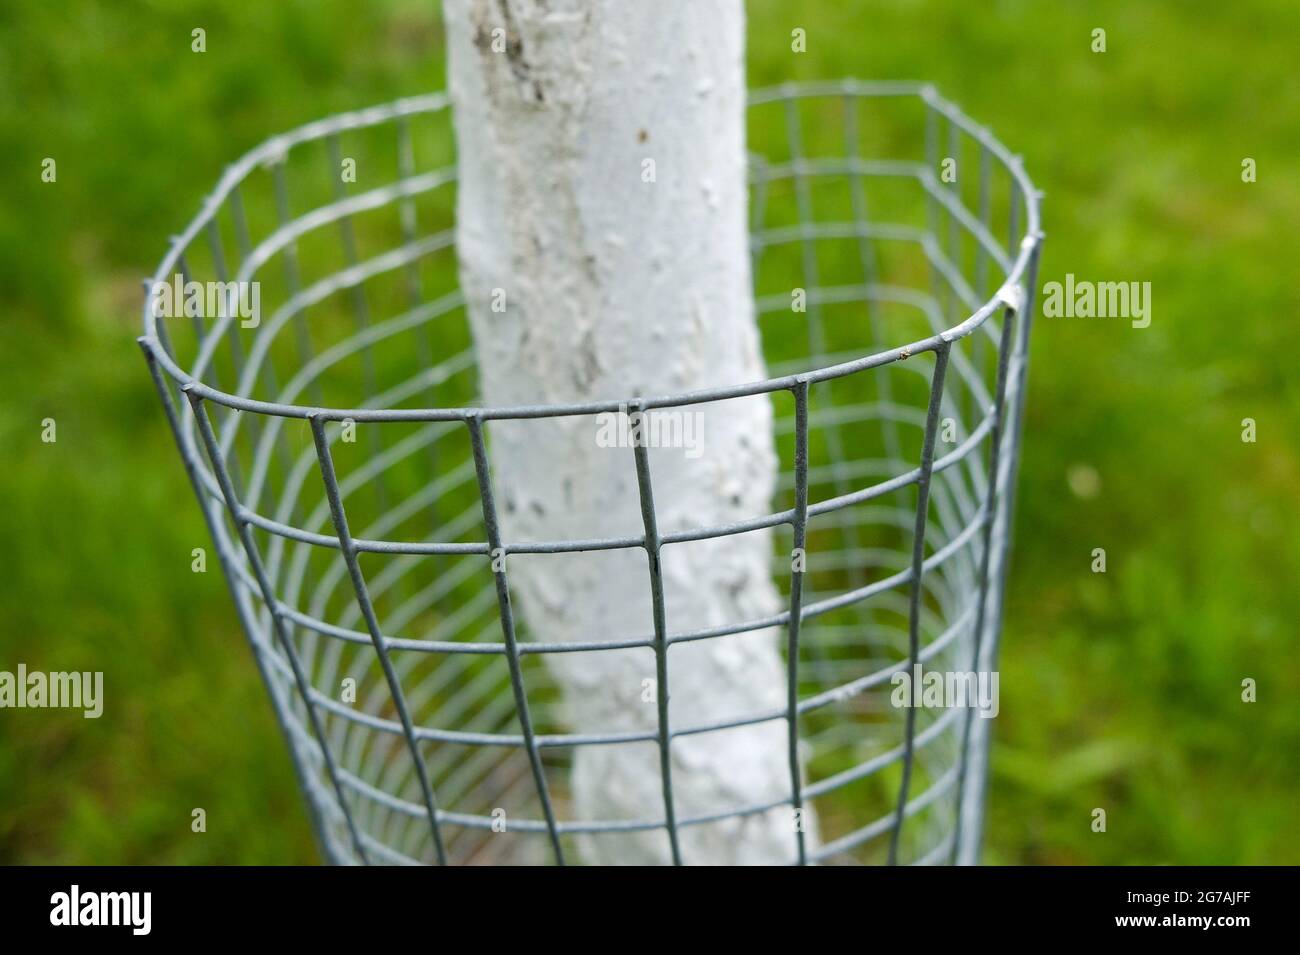 Tree protection to protect the bark against damage by wild animals Stock Photo